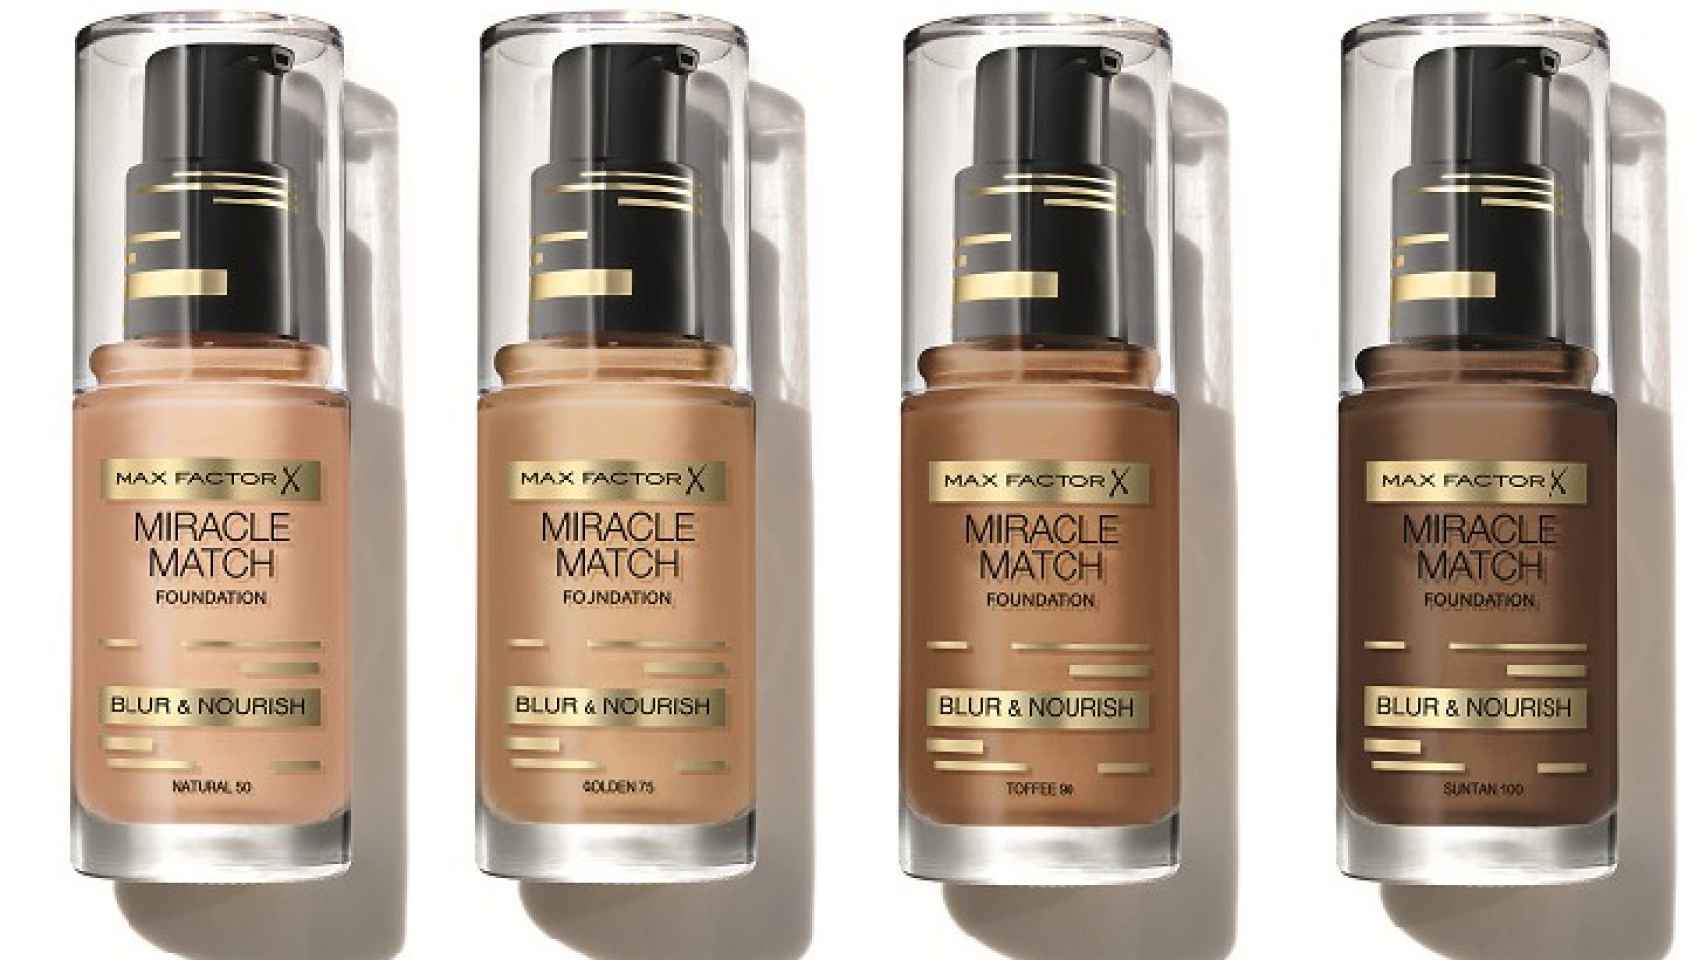 Miracle Match Foundation de Max Factor.